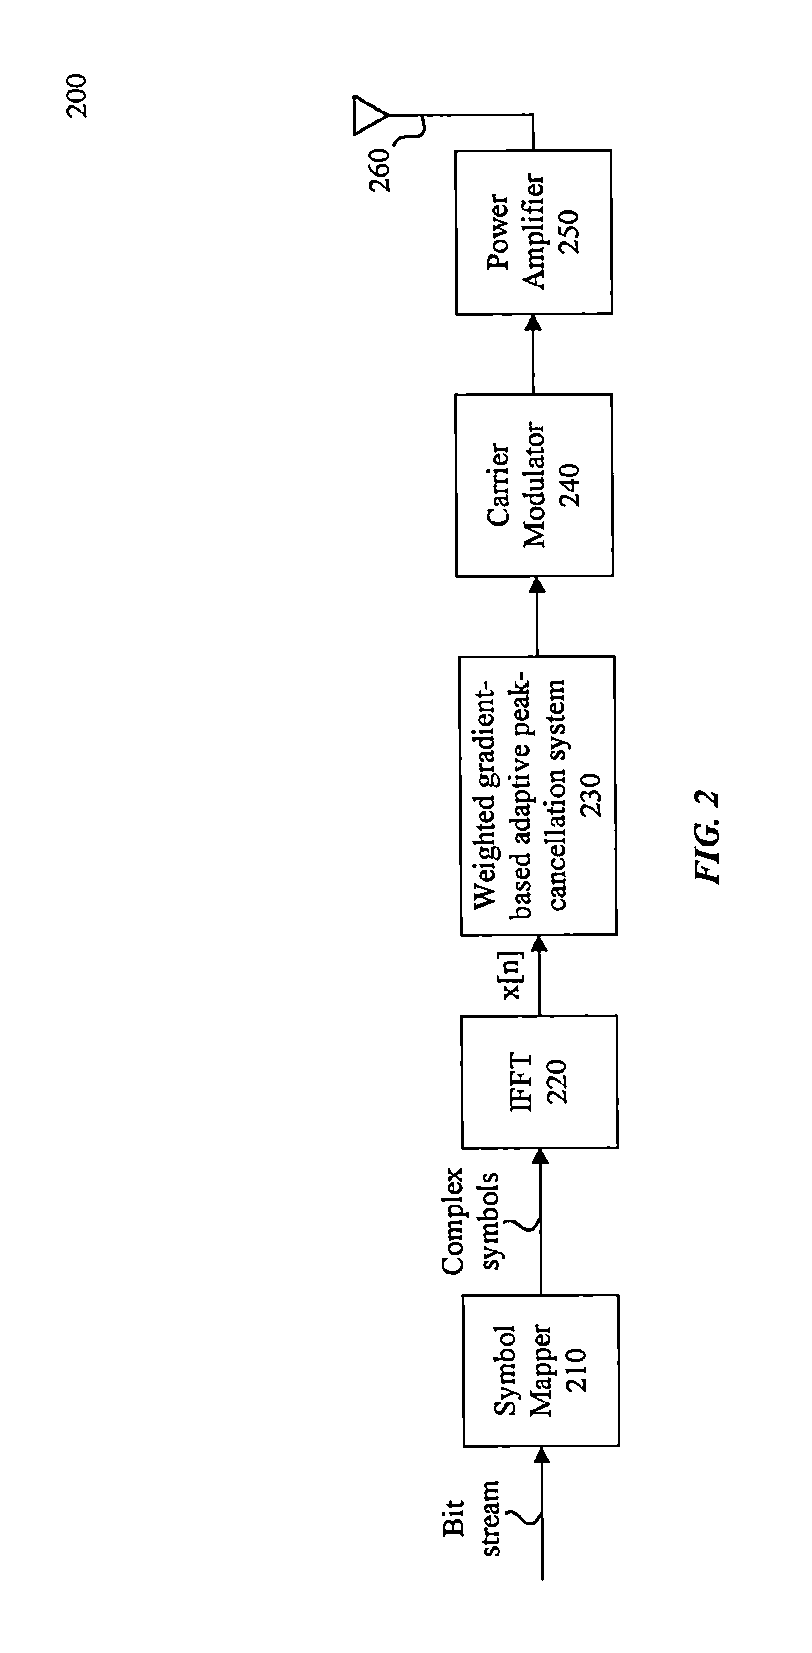 System and method for peak-to-average power ratio reduction of OFDM signals via weighted gradient-based adaptive peak cancellation